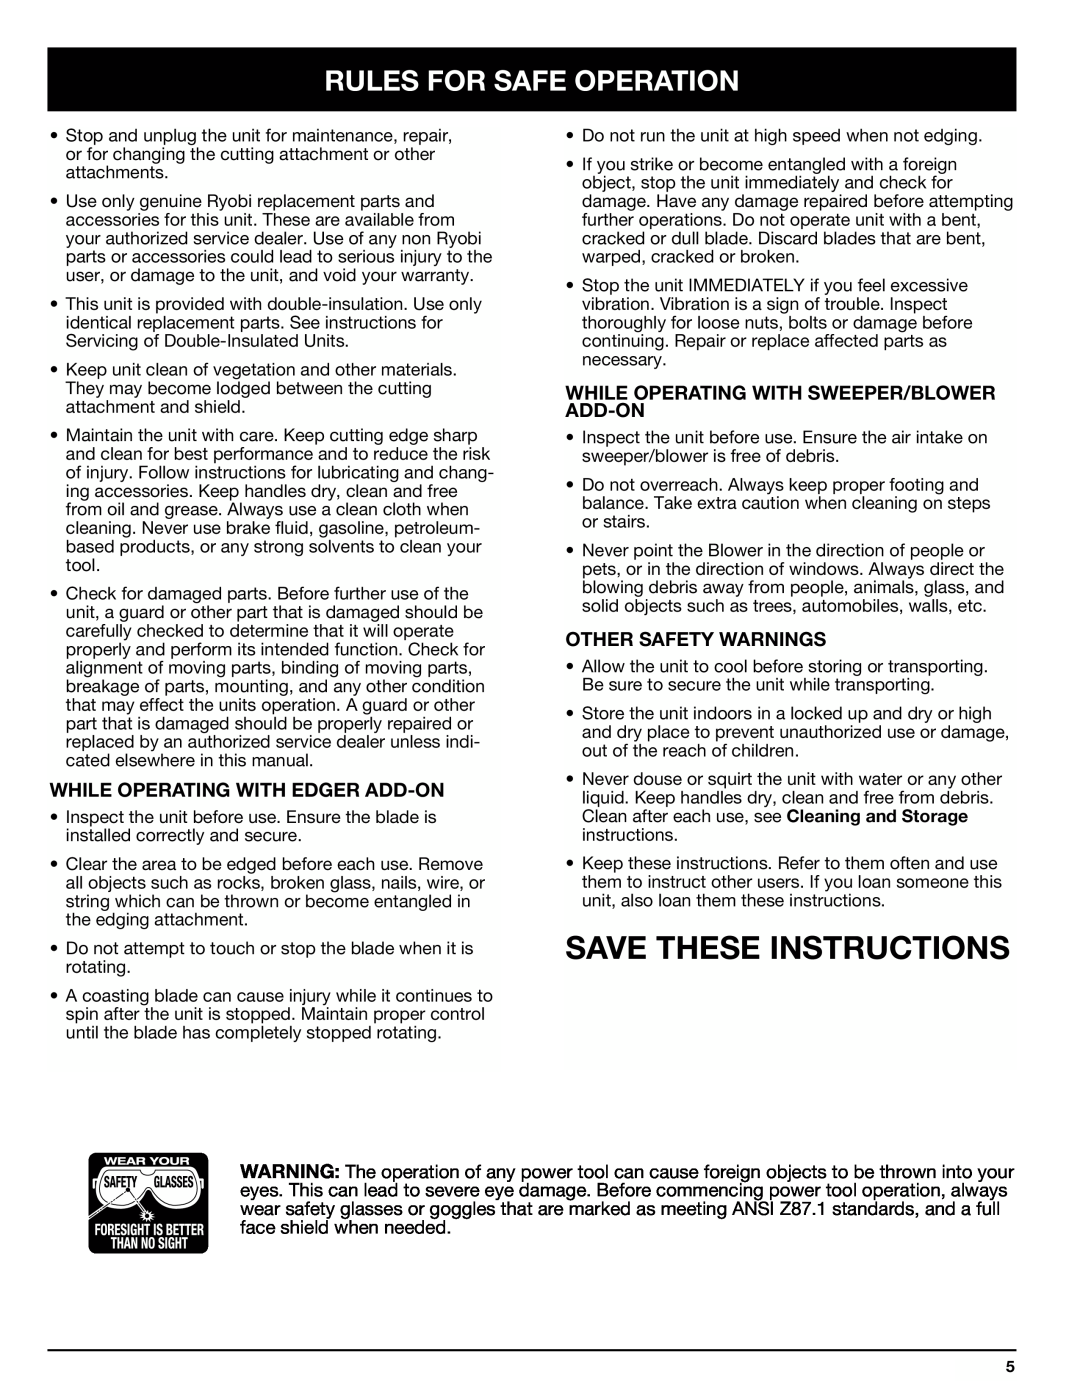 Ryobi 130rEB Save These Instructions, Rules For Safe Operation, While Operating With Edger Add-On, Other Safety Warnings 